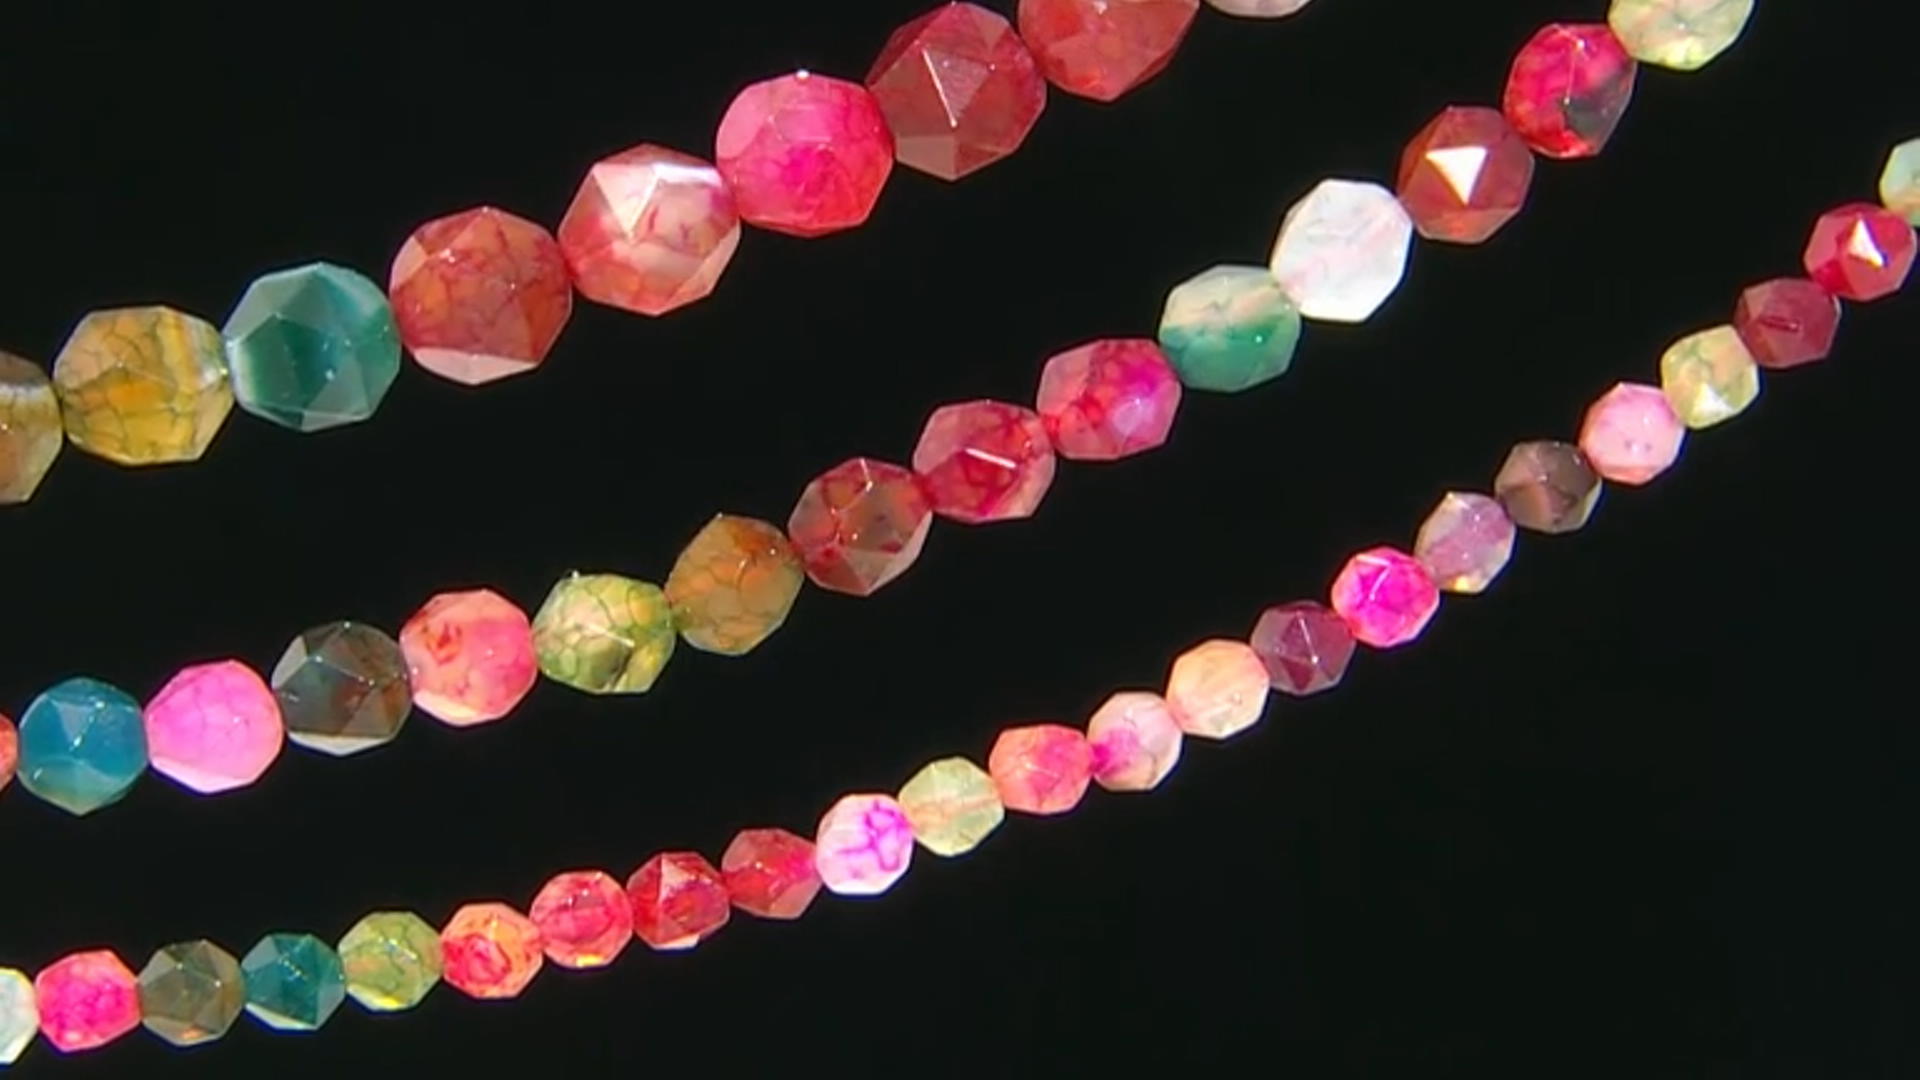 Multi-Color Quench-Crackled Agate Diamond Faceted  Roundish Bead Strand Set of 3 appx 13-14" Video Thumbnail